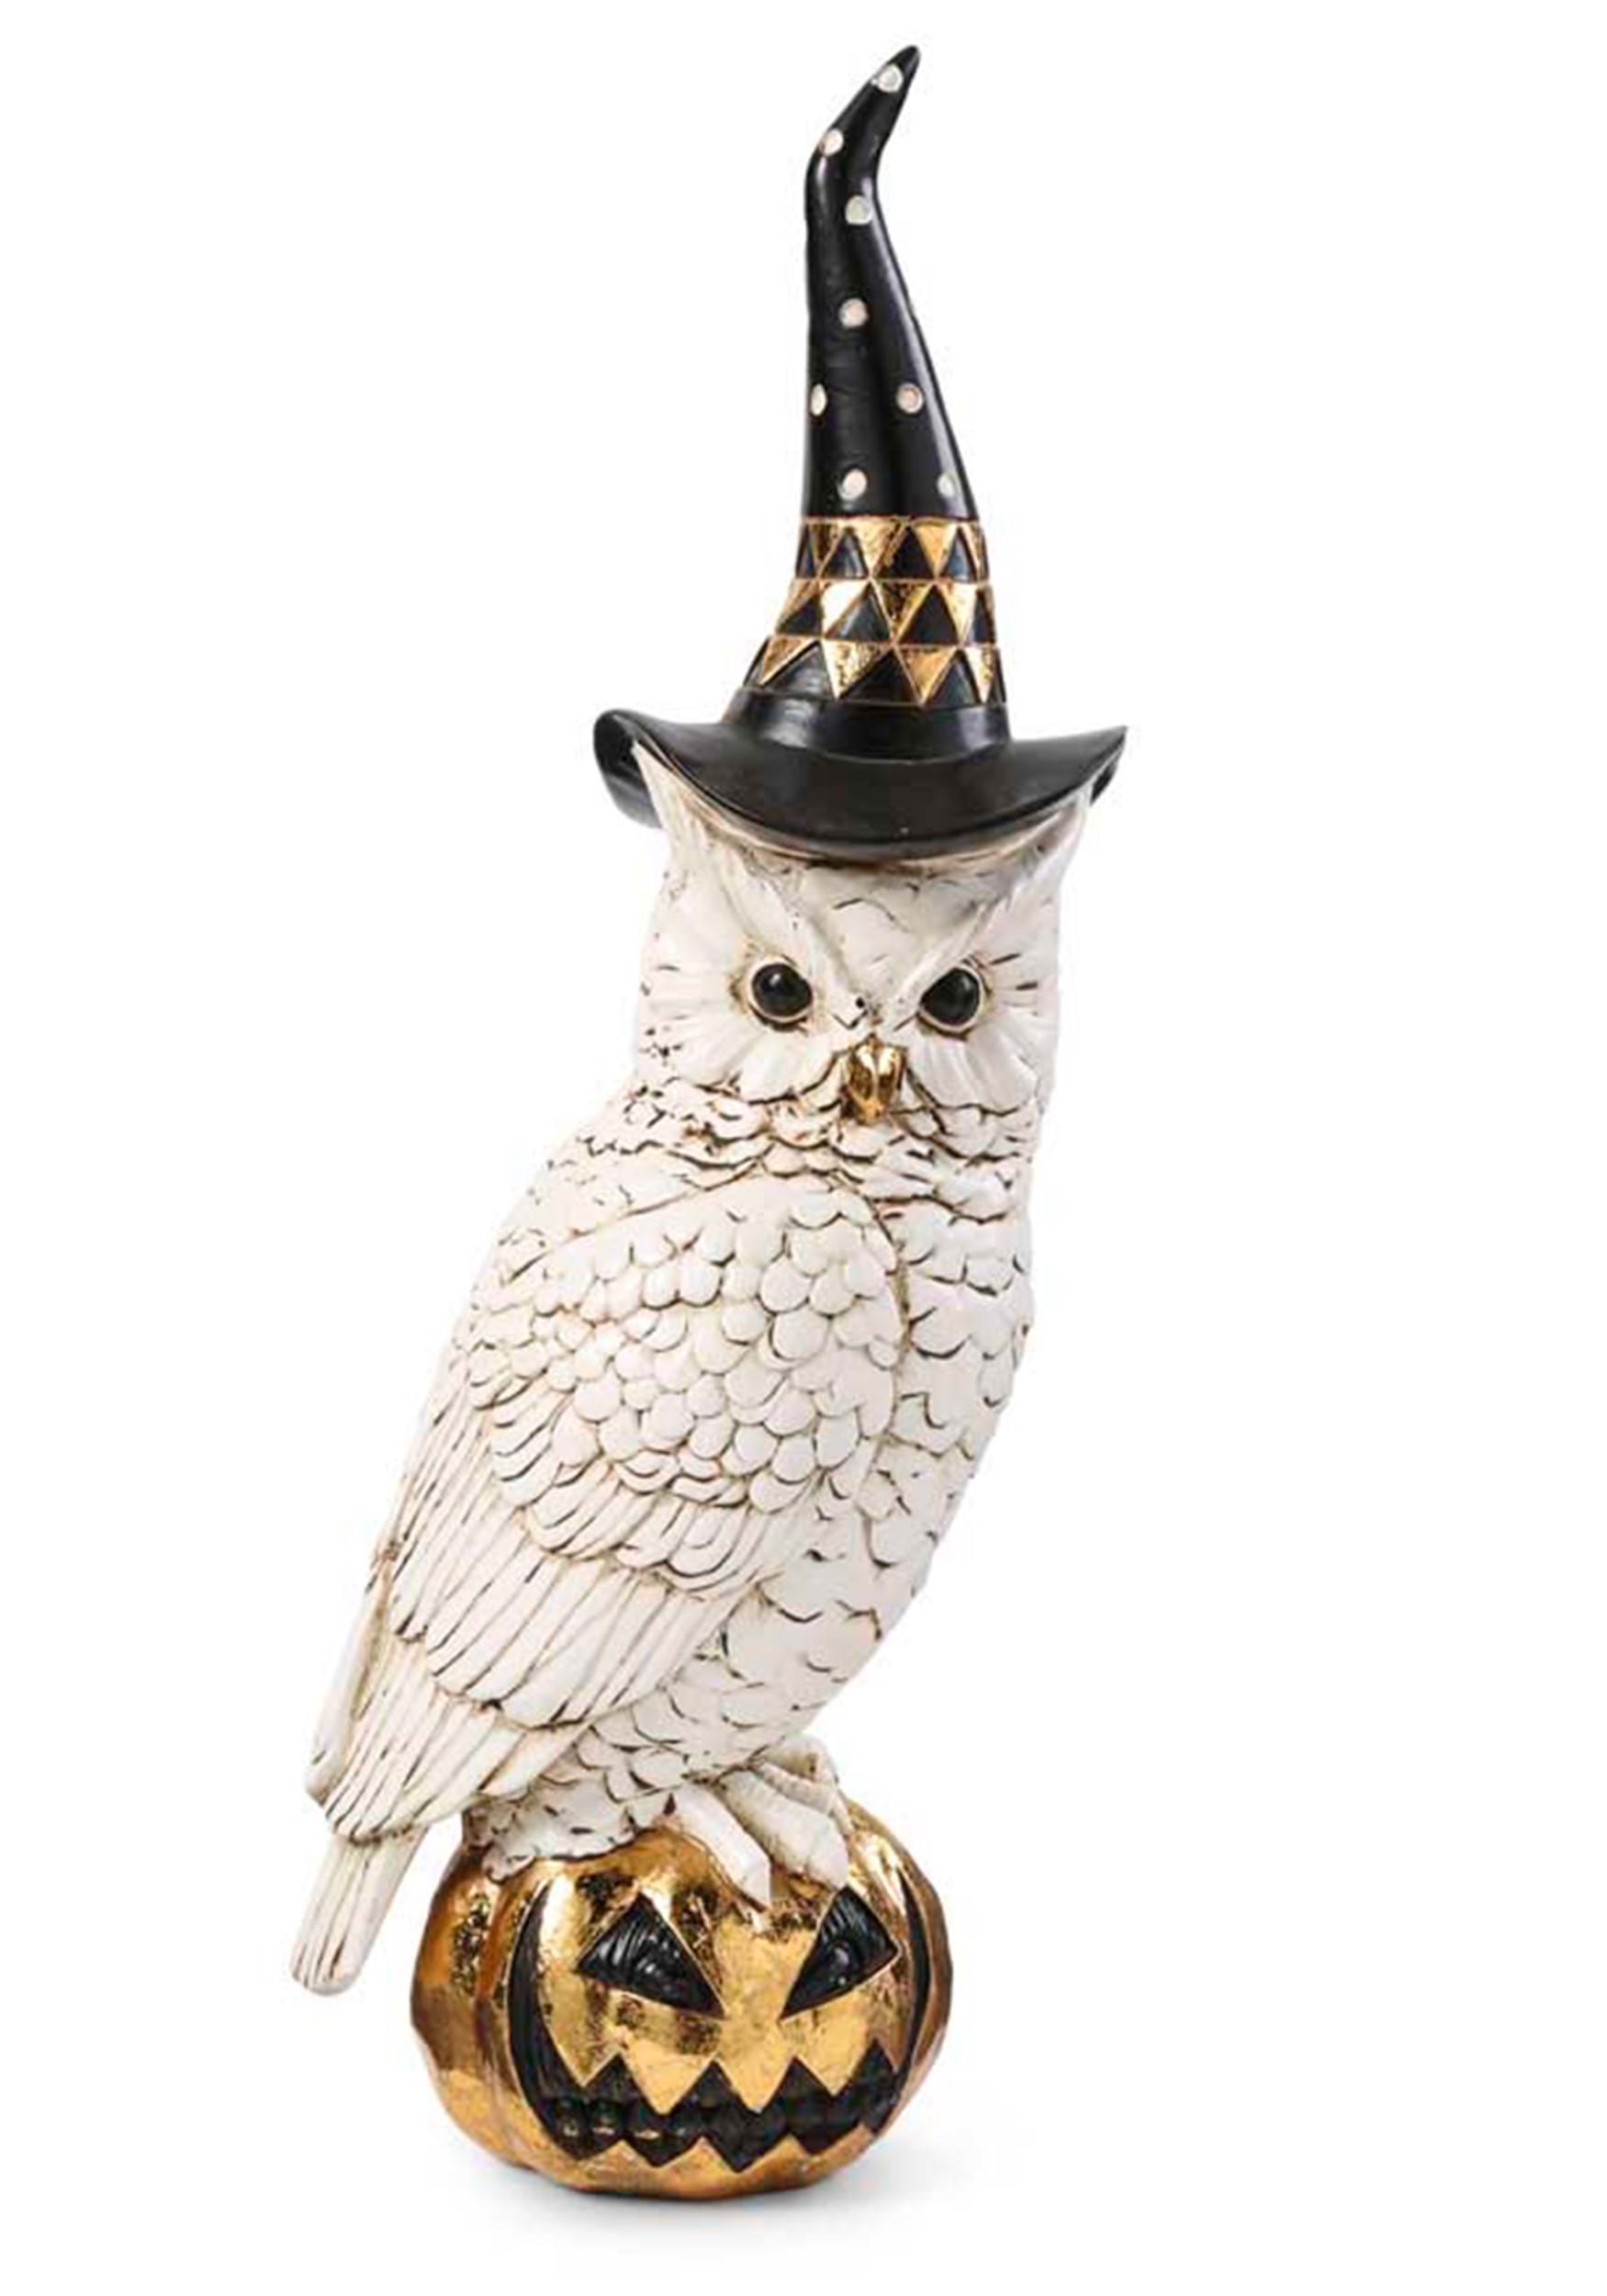 14 Owl With Witch Hat On Gold Jack 'O Lantern Prop , Bird Decorations